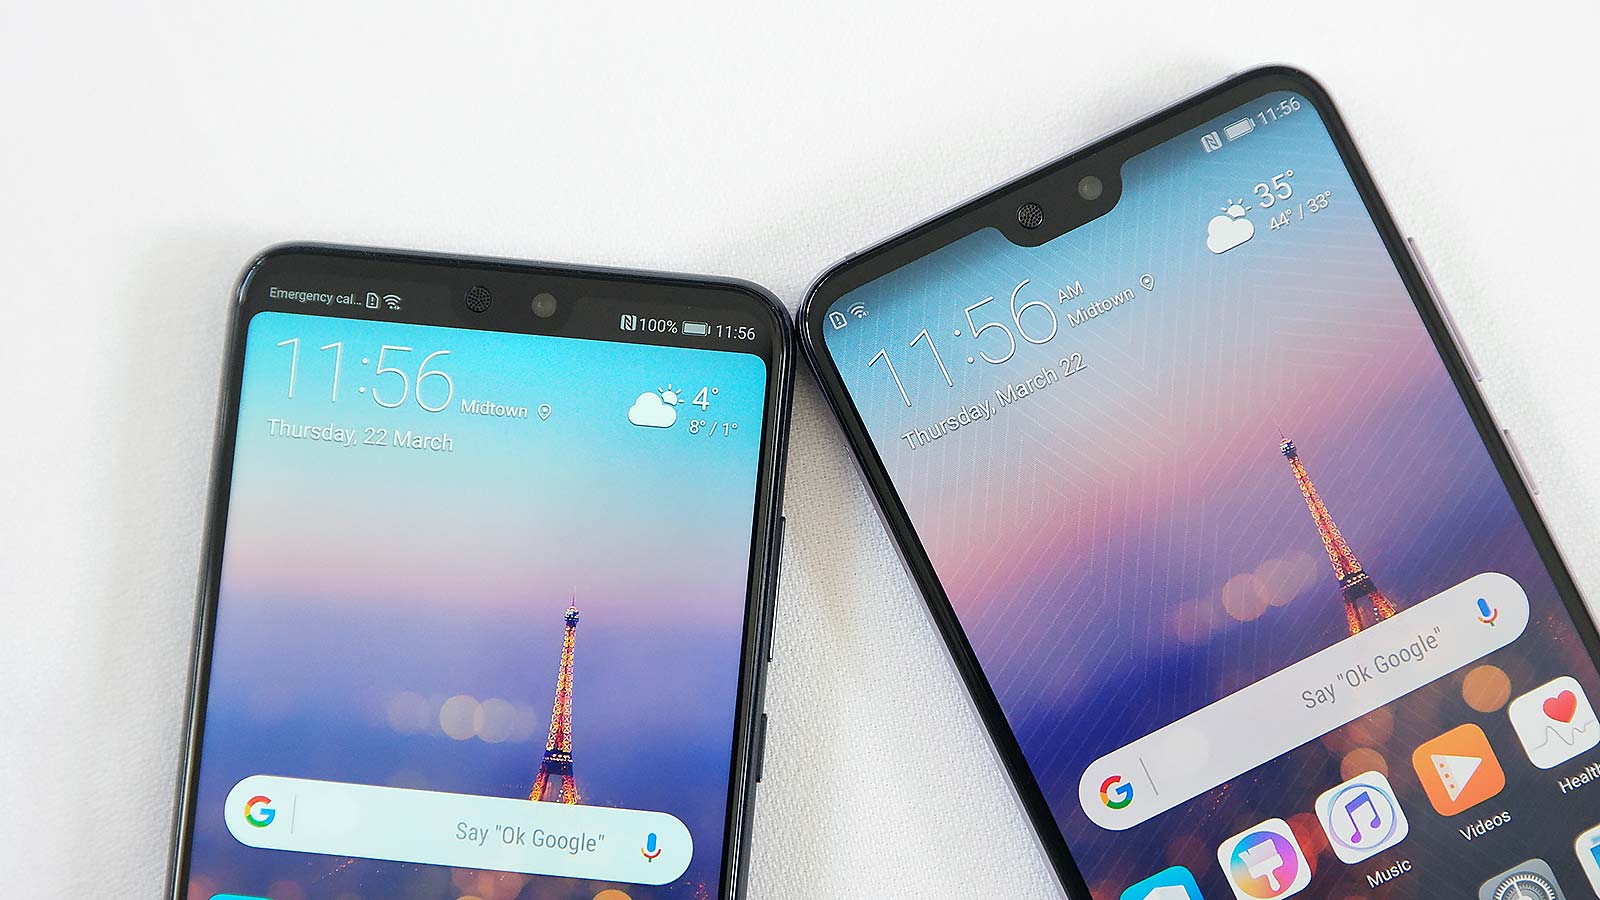 Huawei’s New Triple Camera Smartphone Could Start A Tech Arms Race